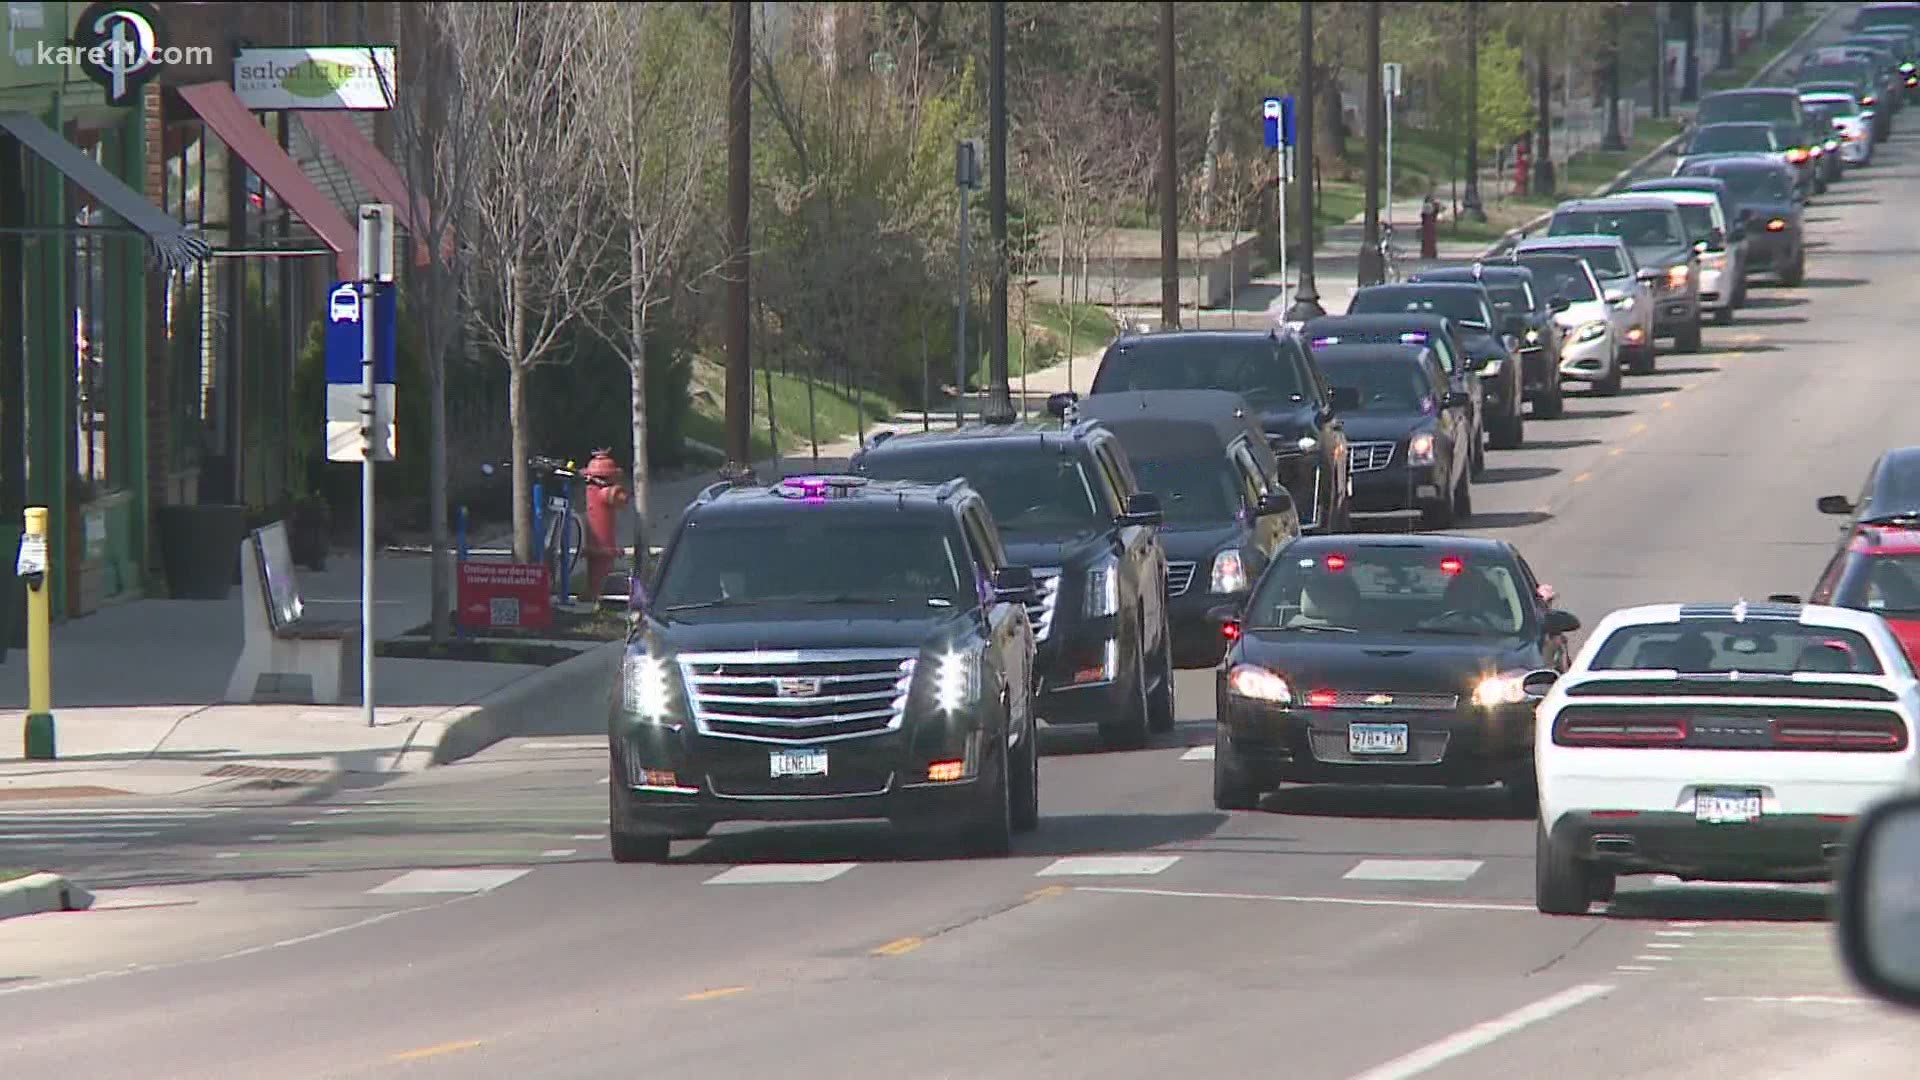 Following Thursday's service for Daunte Wright, the funeral procession headed to Lakewood Cemetery in Minneapolis - where Daunte Wright was cremated